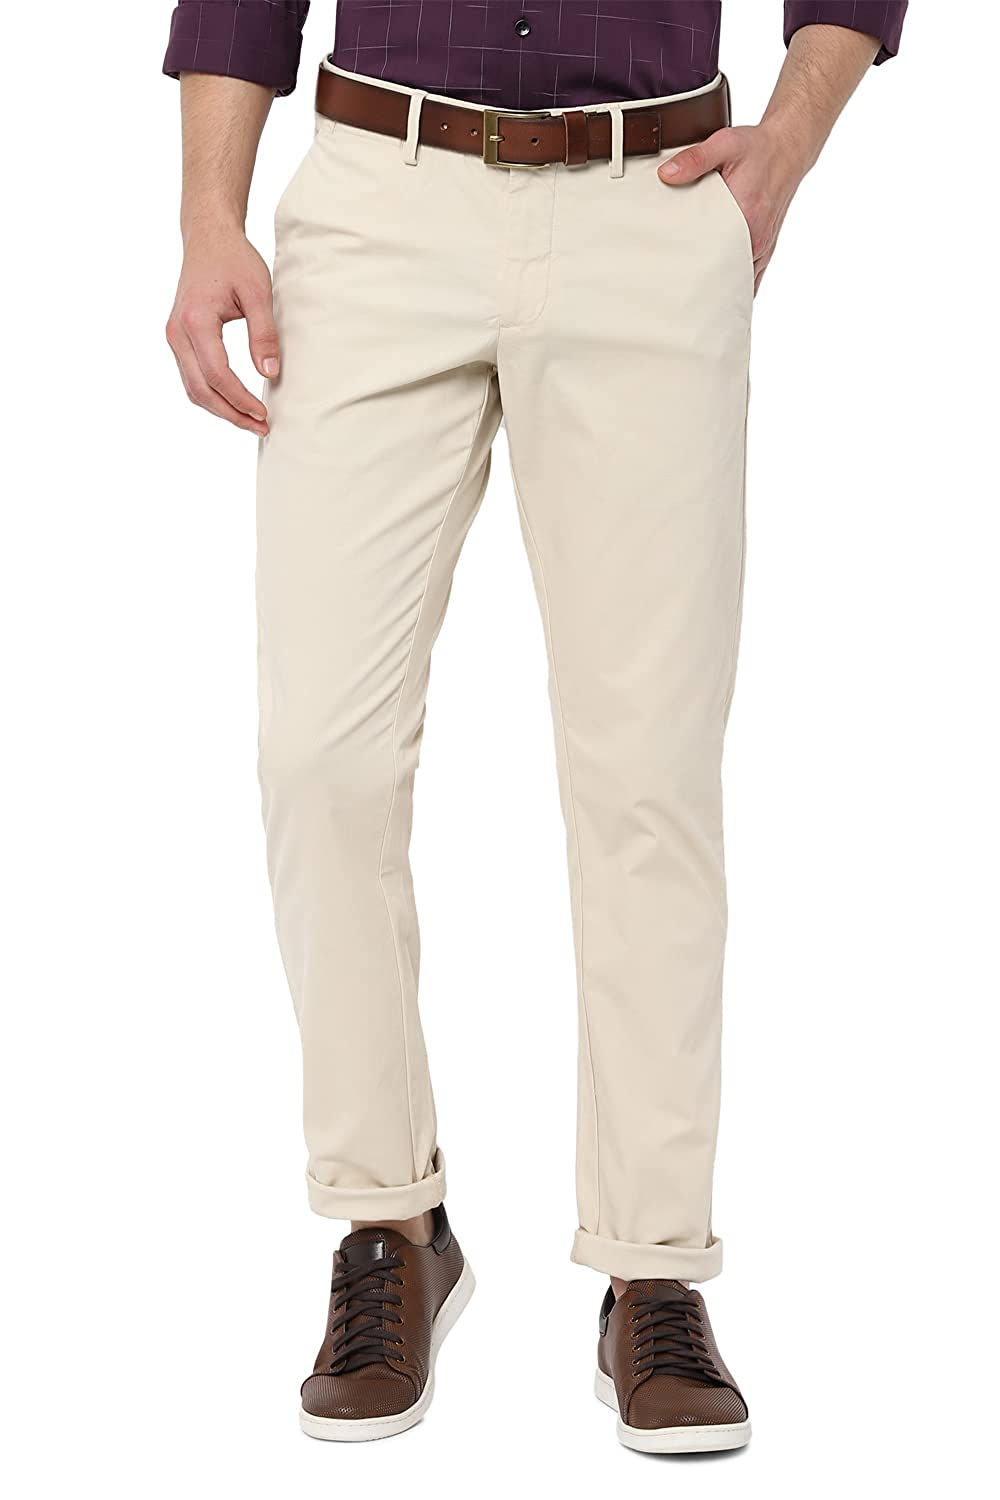 Top Brands Trousers  Buy Top Brands Trousers online in India